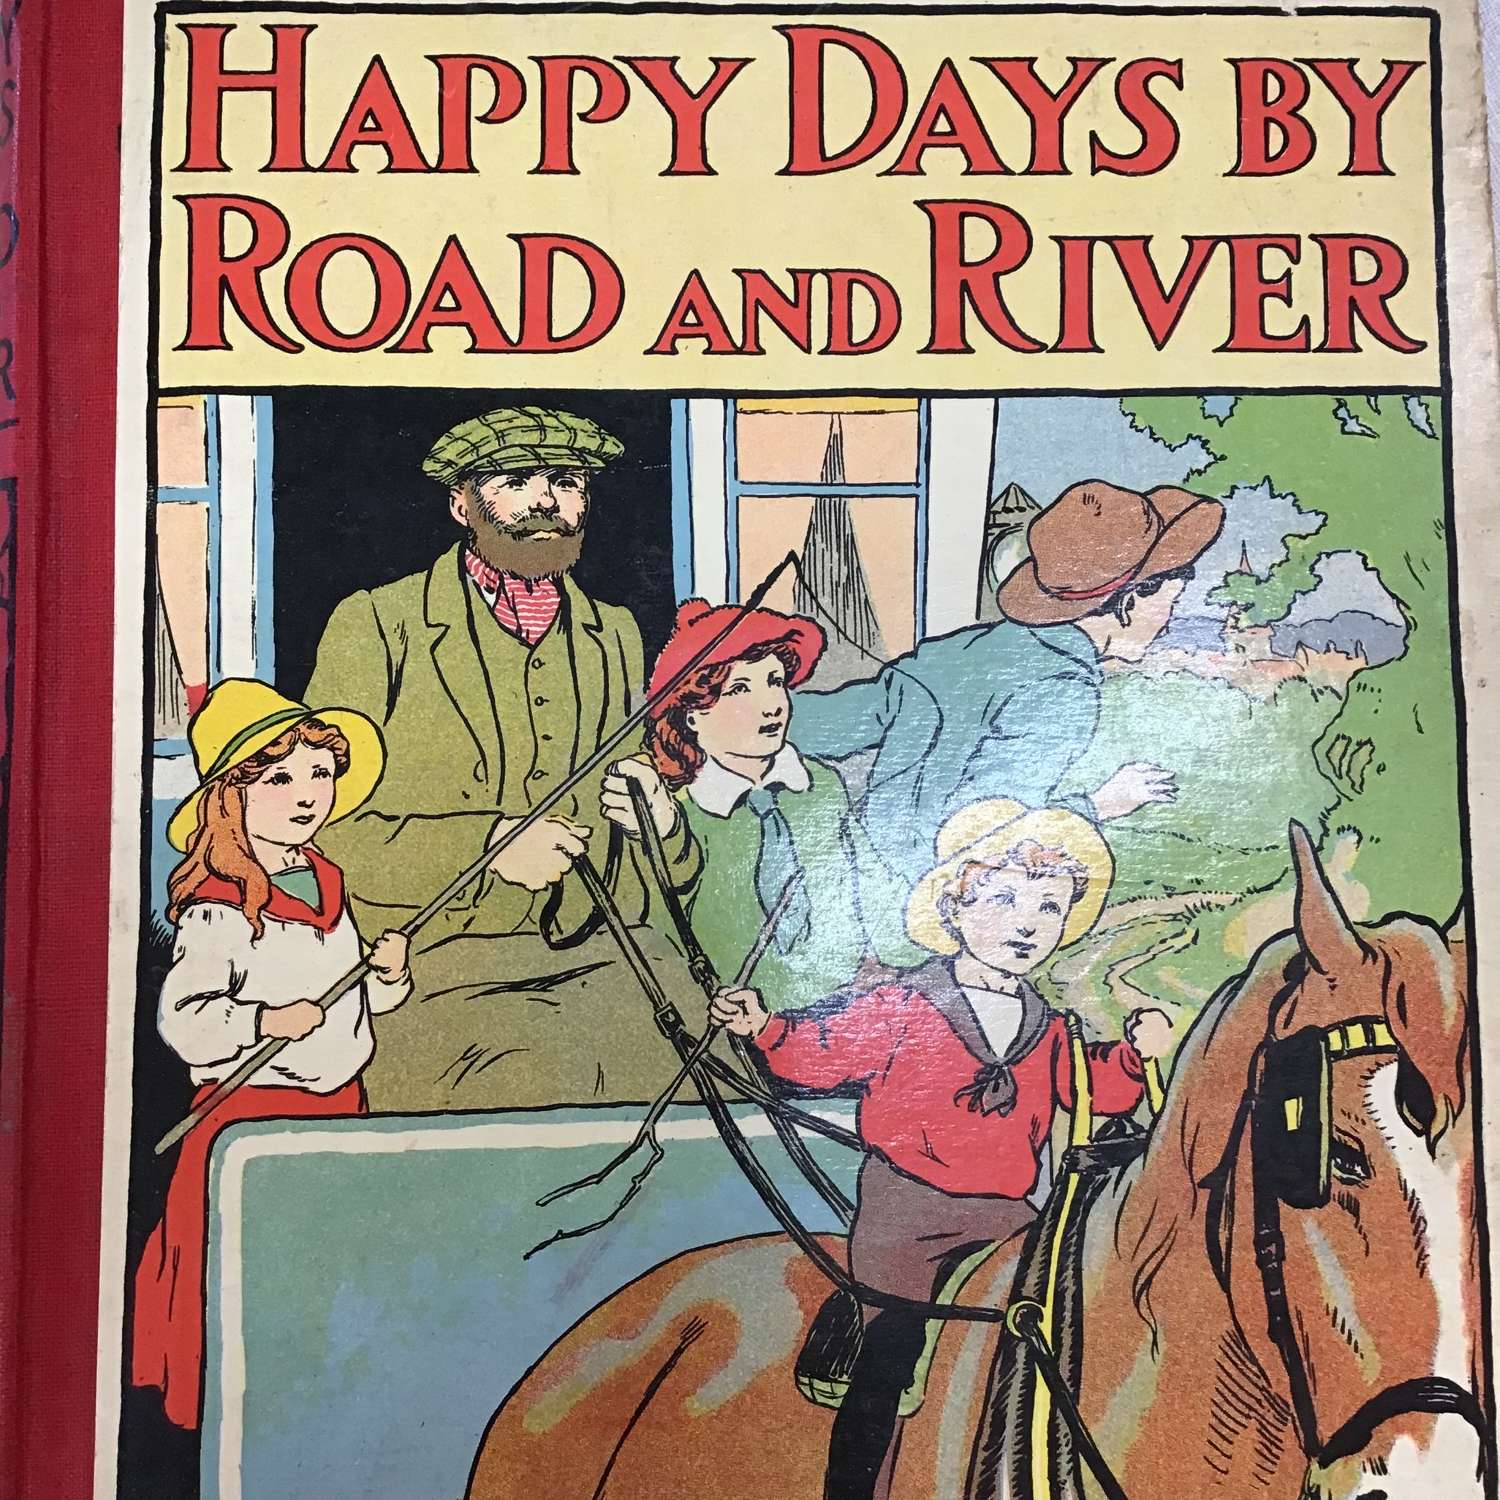 Happy days by road and river 1912